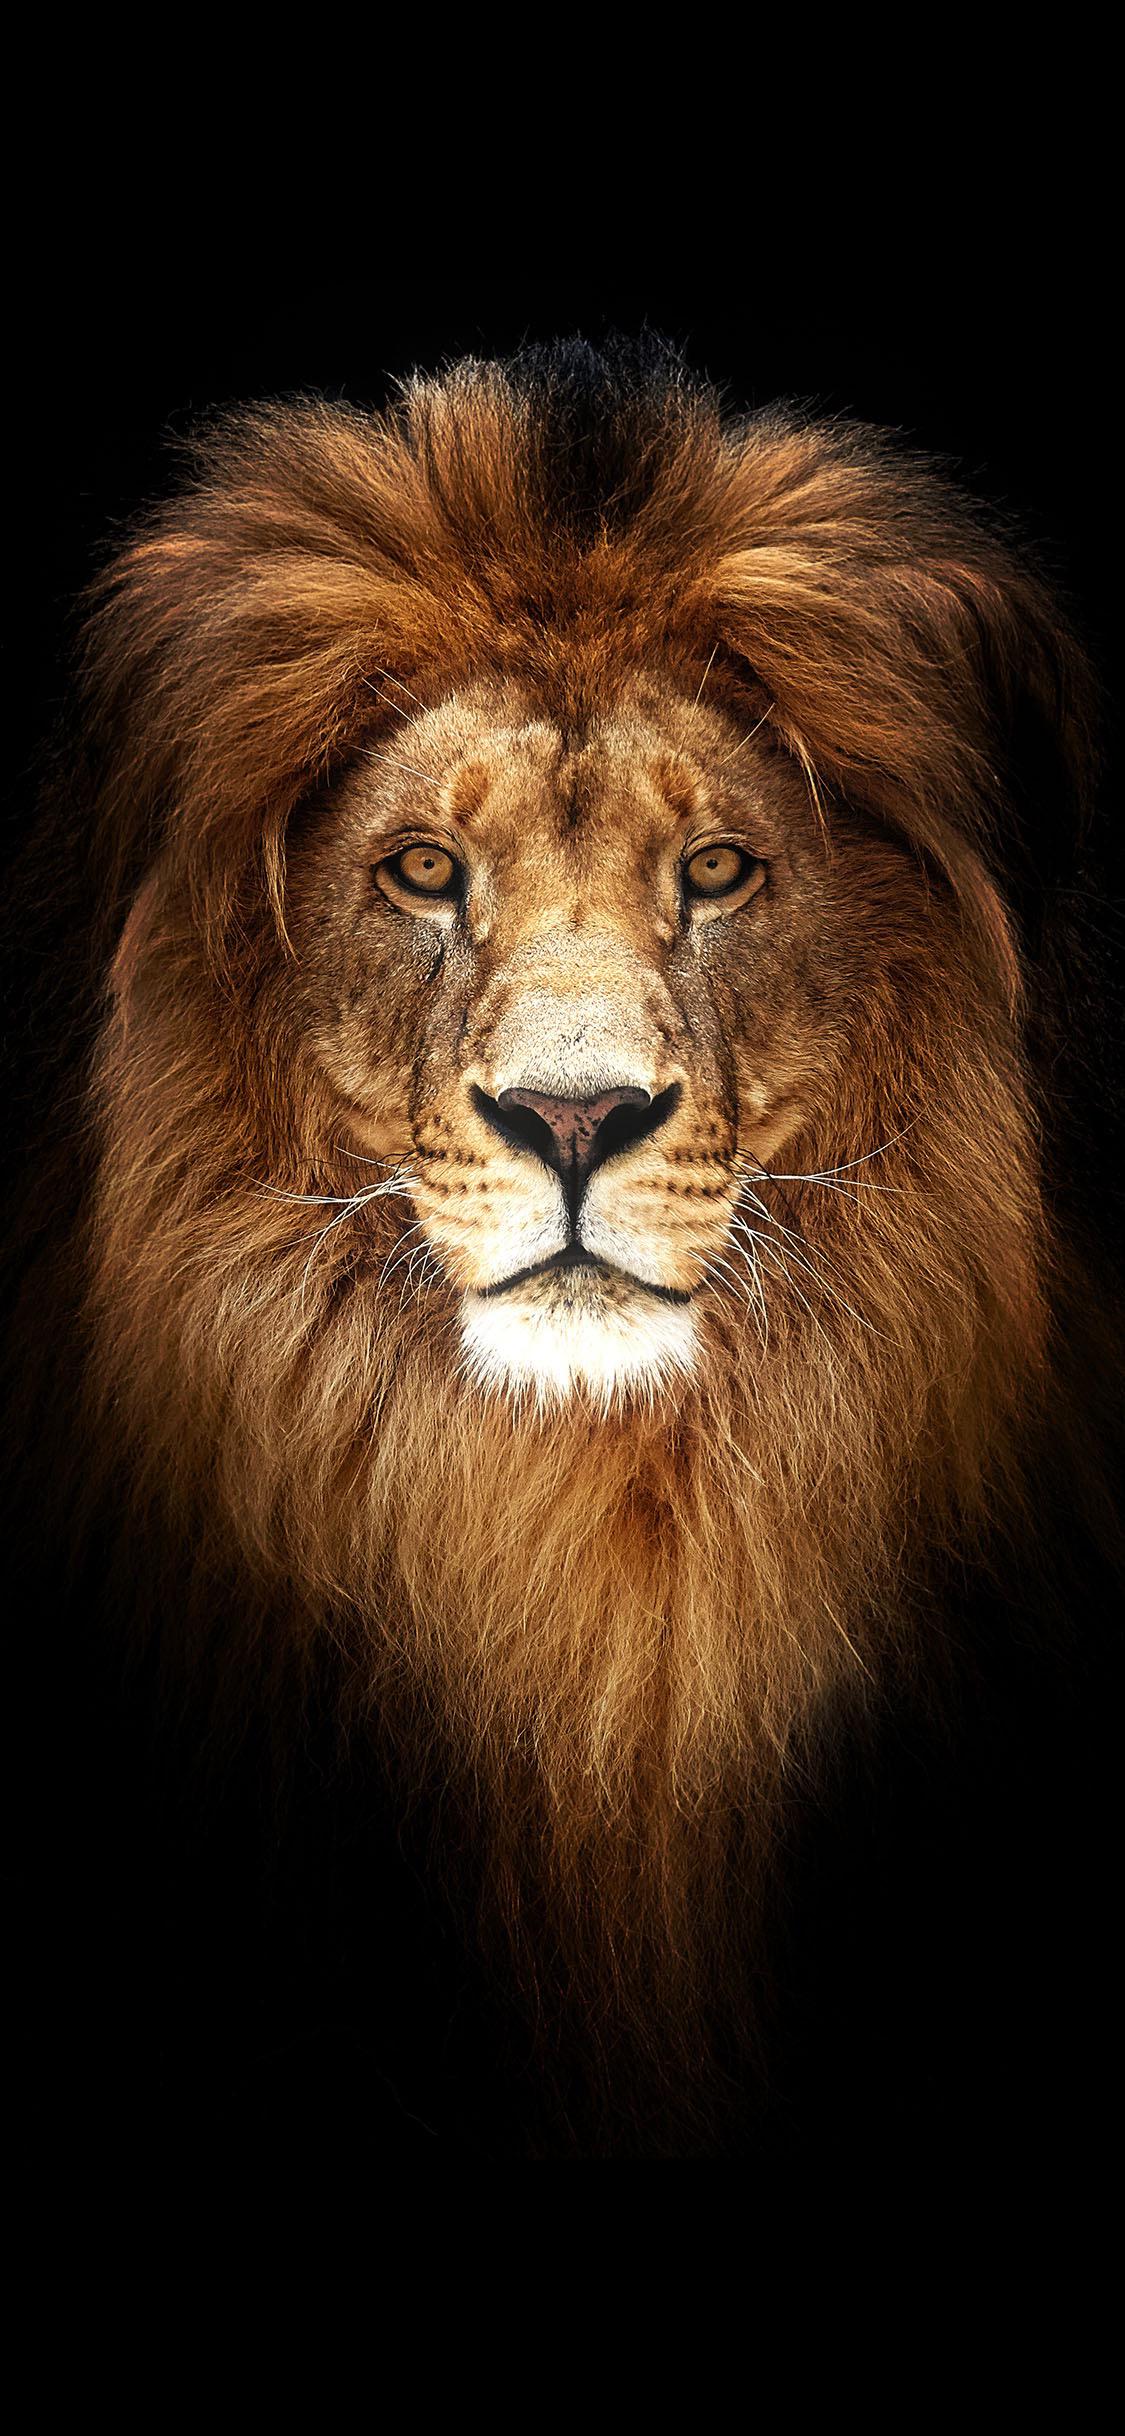 IPhone wallpaper of a lion in black background - Lion